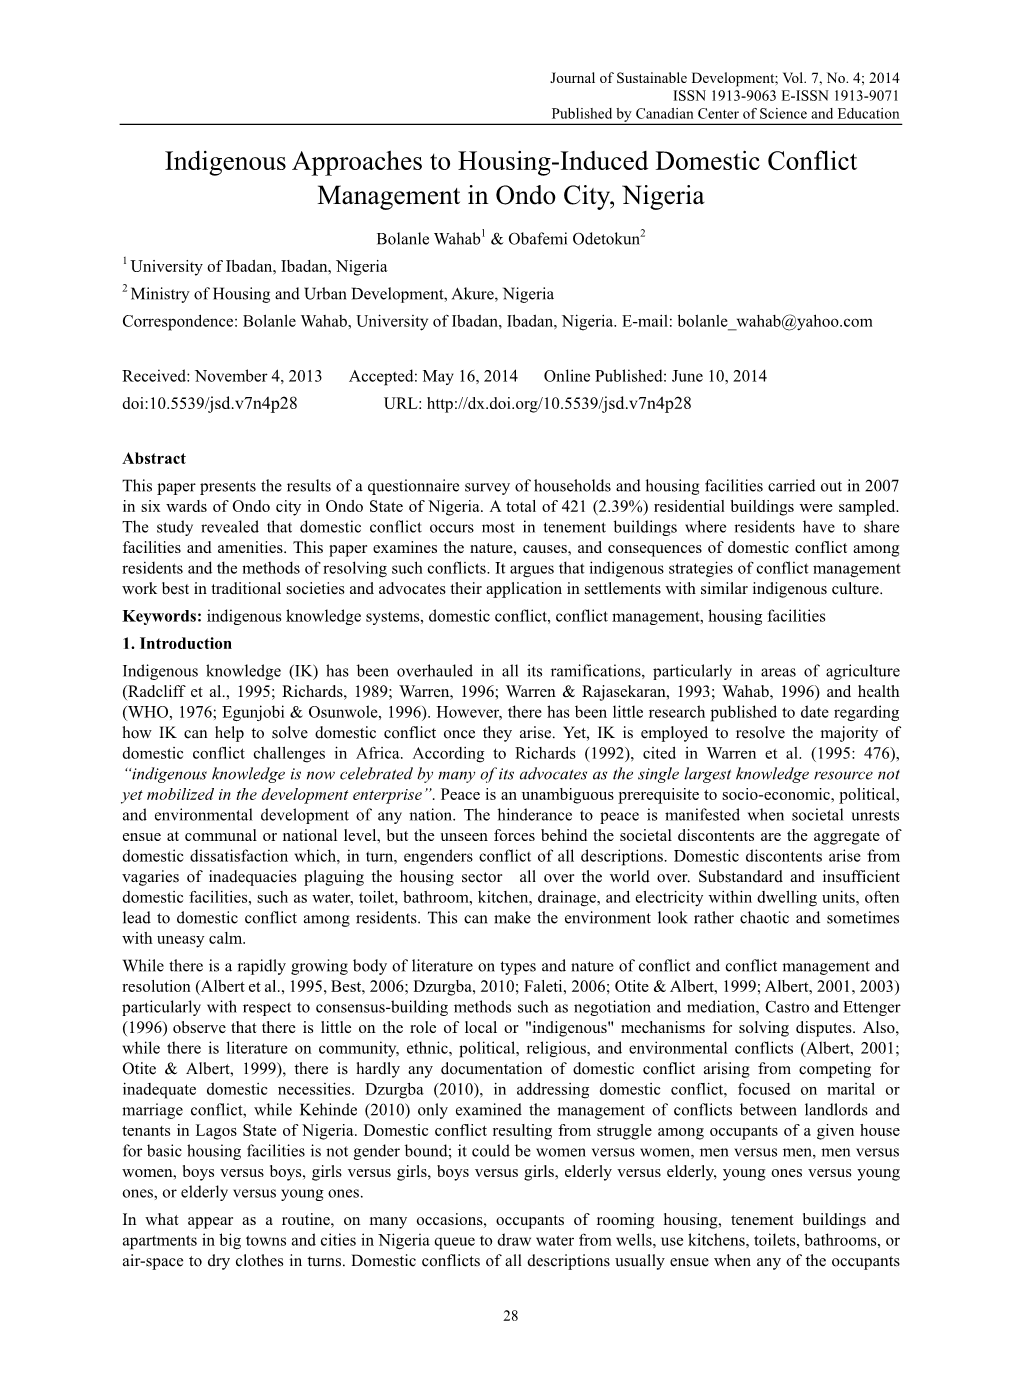 Indigenous Approaches to Housing-Induced Domestic Conflict Management in Ondo City, Nigeria